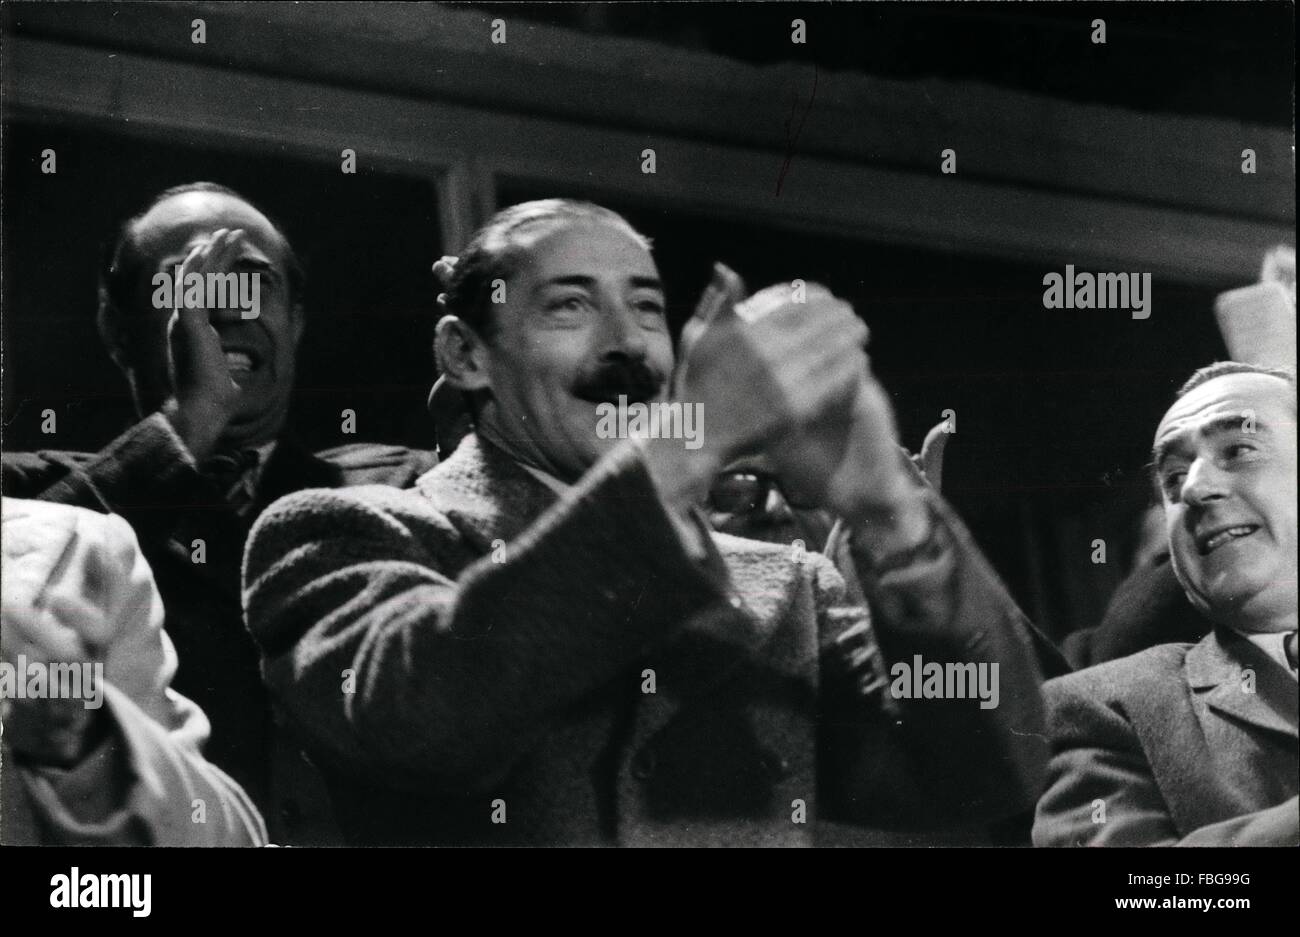 1967 - President Videla assisting recent world soccer championship in Argentina; He (center) applauds during one favourable moment when Argentina's National team obtained a goal. At right is another member of the military Junta, Brigadier General Orlando Ramon Agosti, also comparting the pleasure of the lucky moment. © Keystone Pictures USA/ZUMAPRESS.com/Alamy Live News Stock Photo